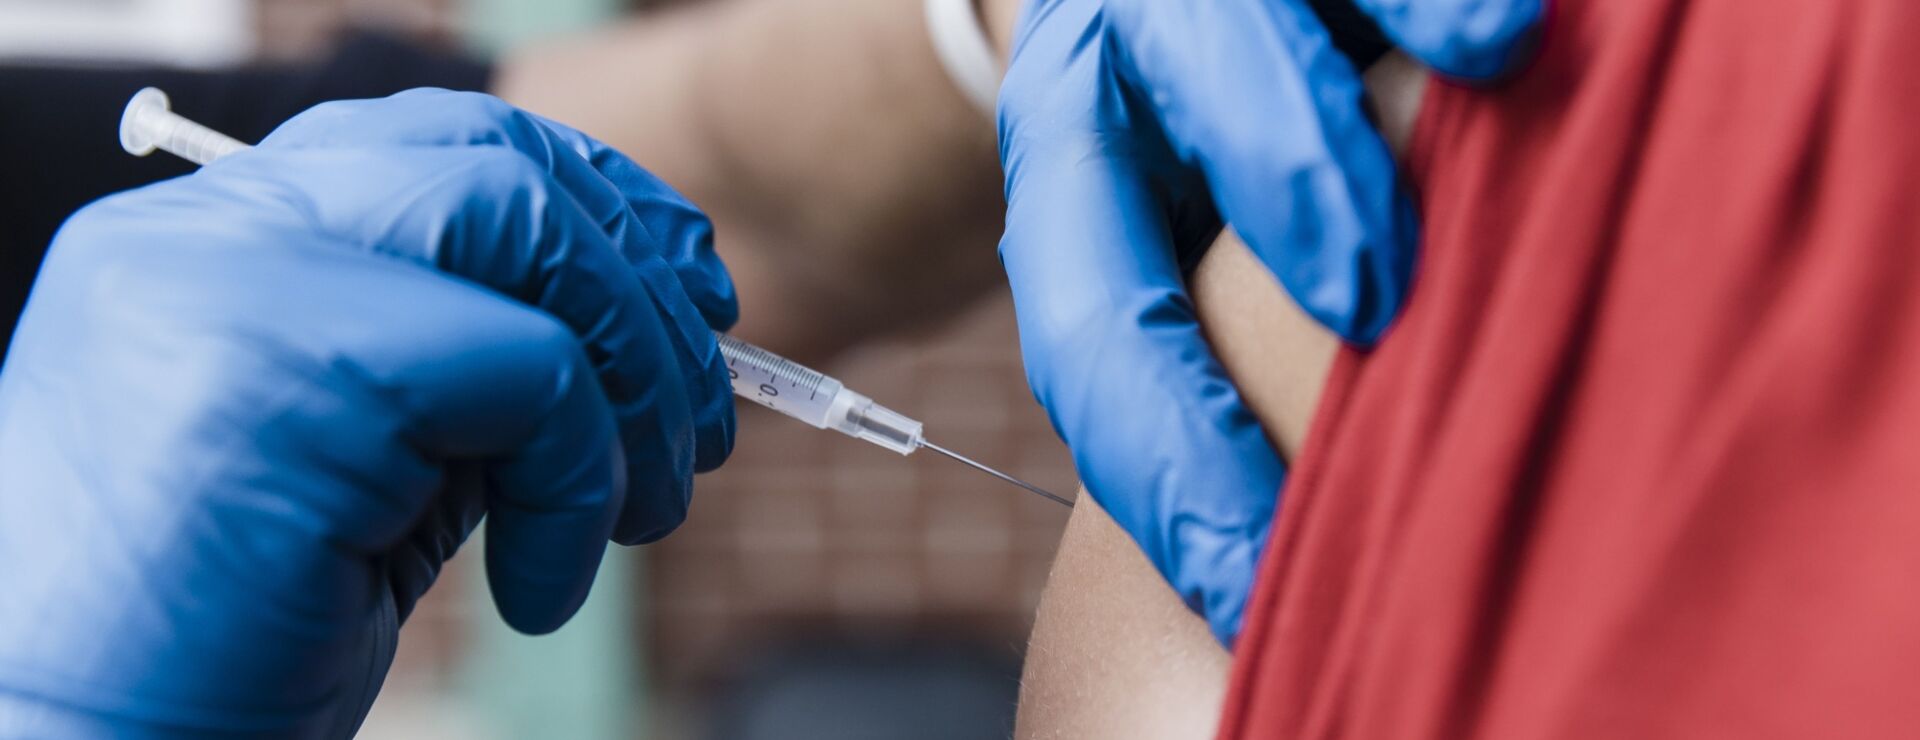 California Covid Vaccine Mandate Suit Revived by Ninth Circuit